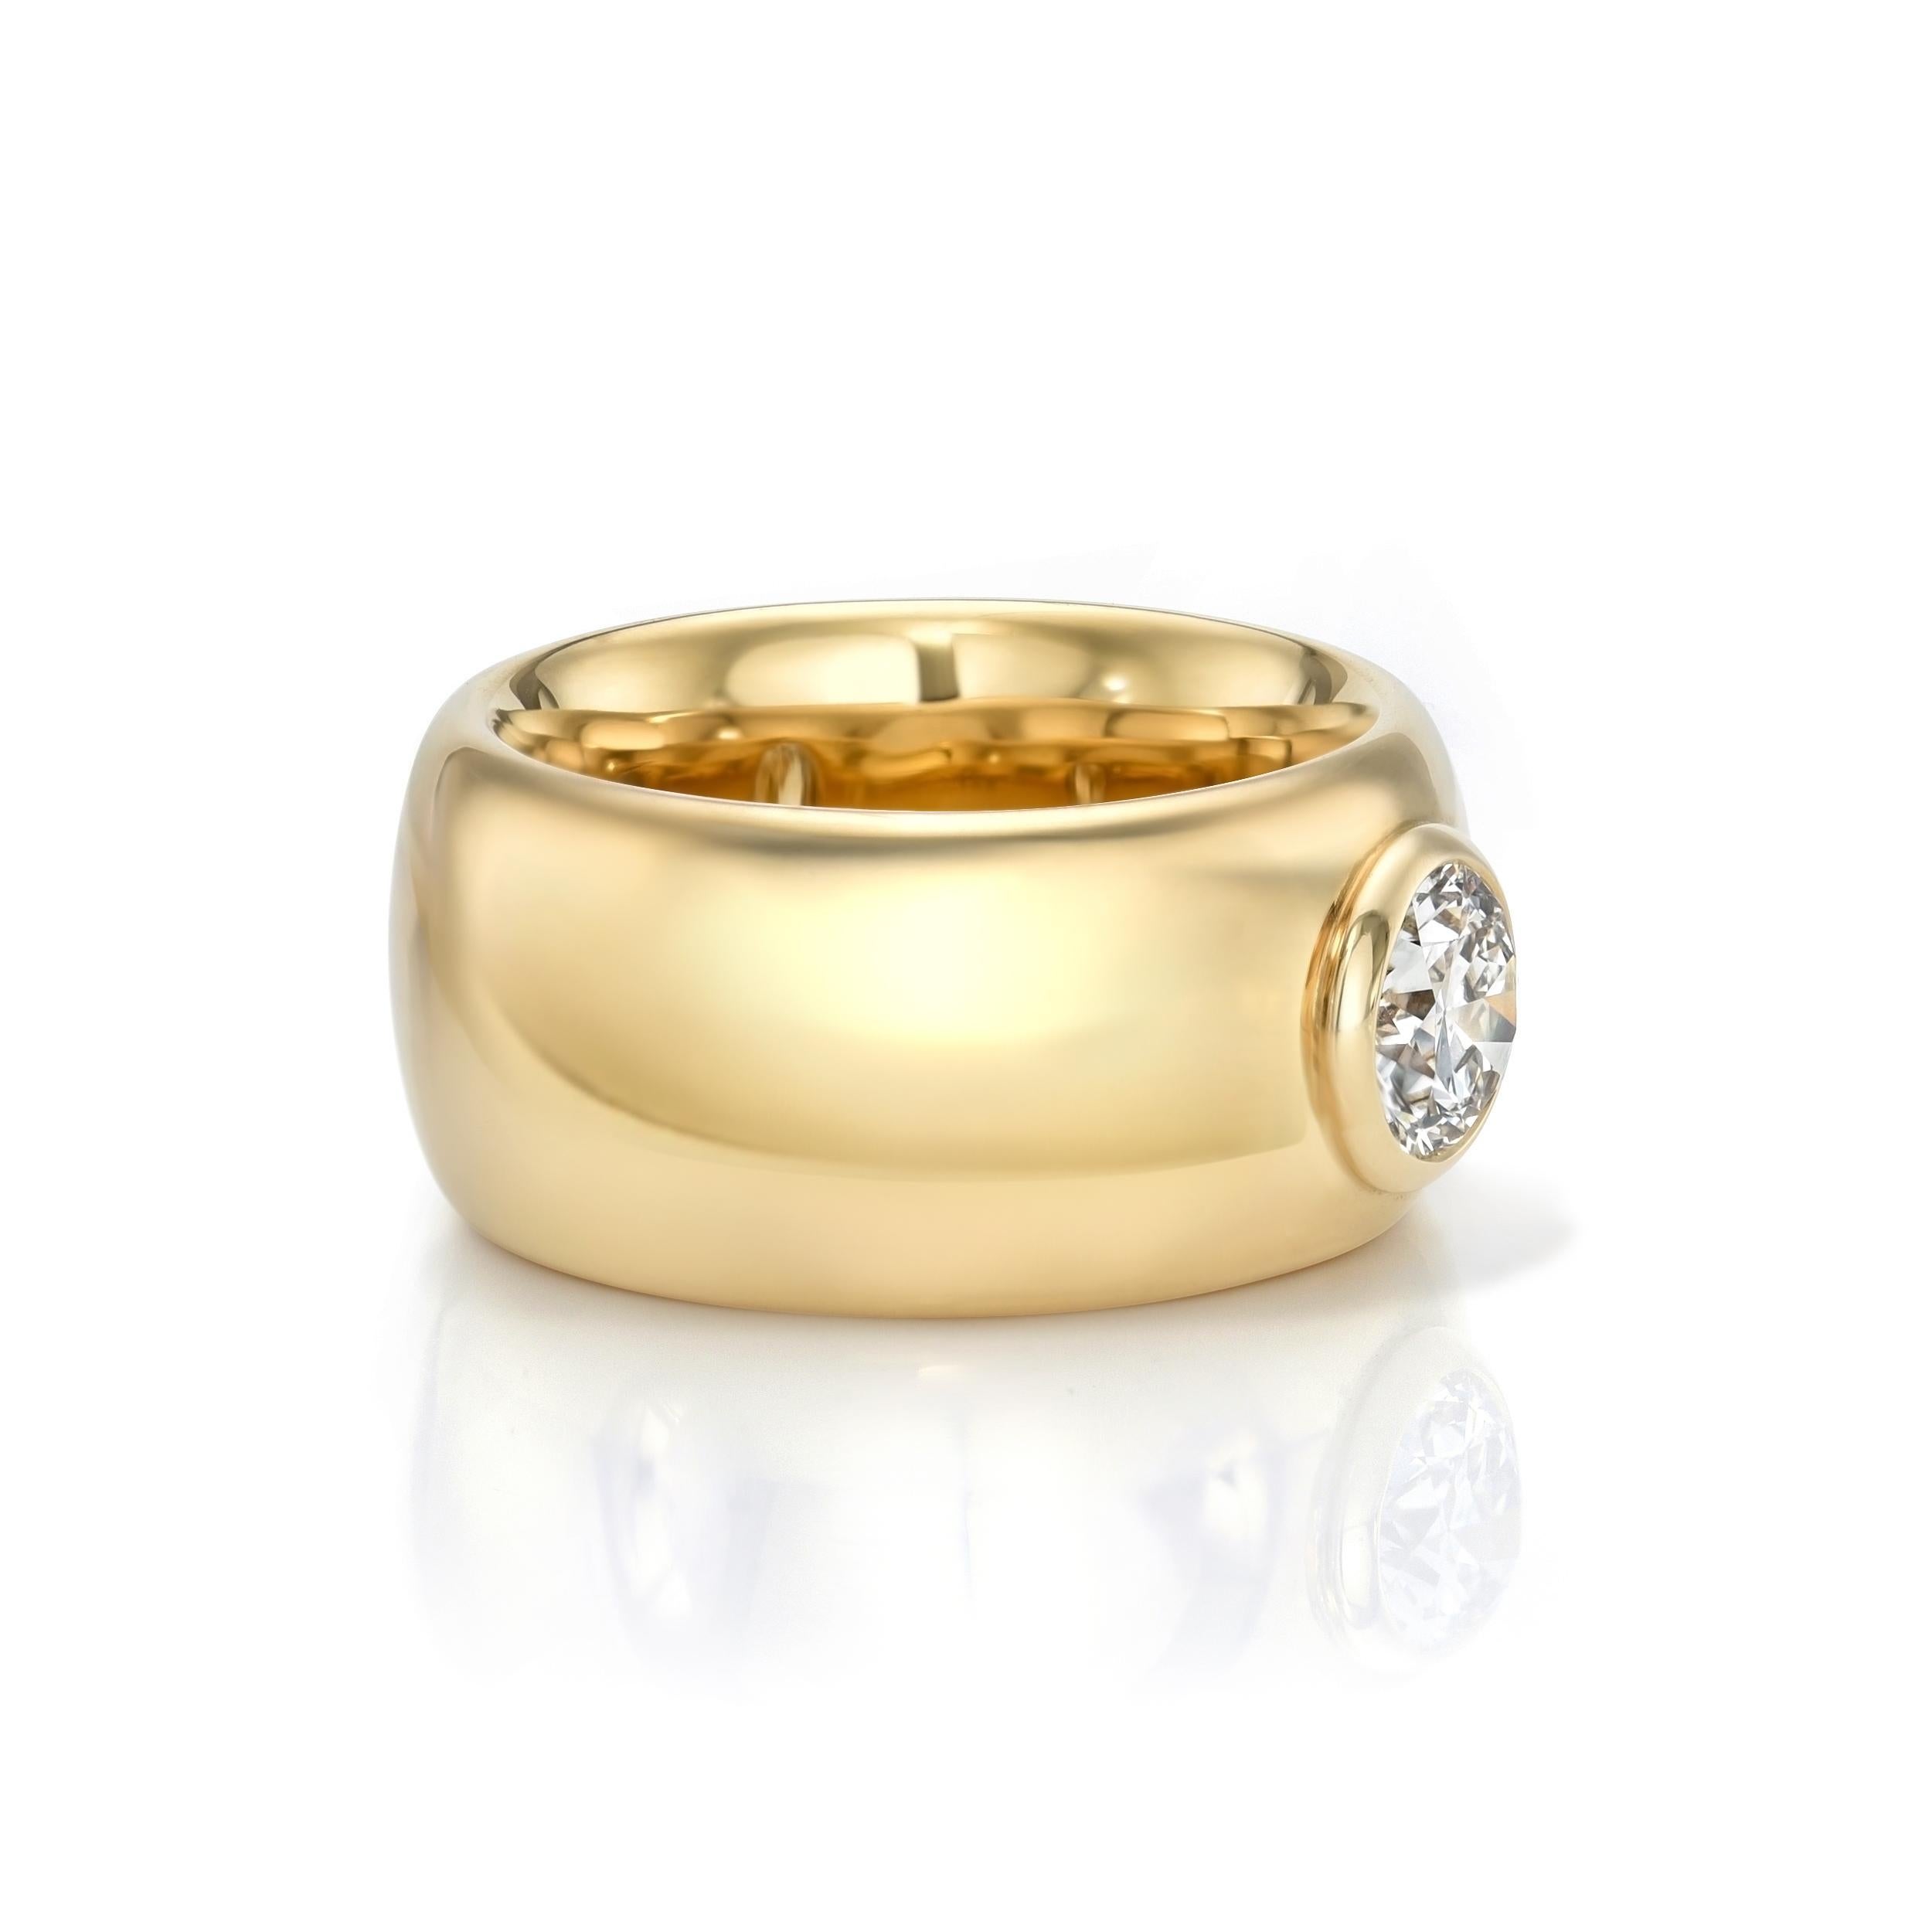 1.00ct J/SI2 GIA certified old European cut diamond bezel set in a handcrafted 18K yellow gold wide dome mounting.